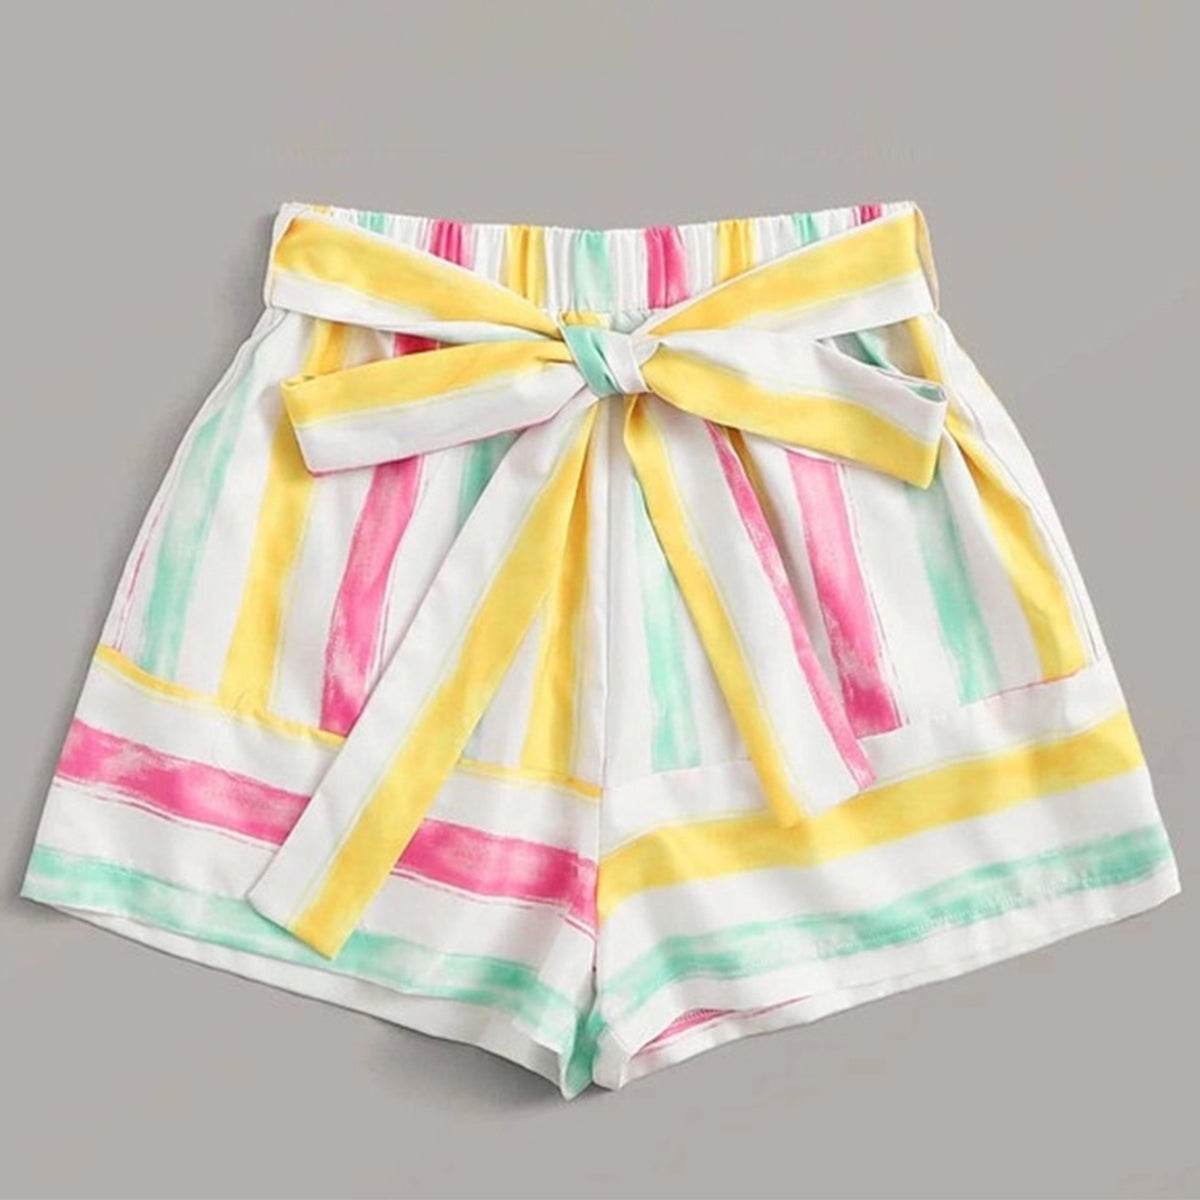 Crop Rainbow Stylish Top Sleeveless And Shorts For Baby Girls.